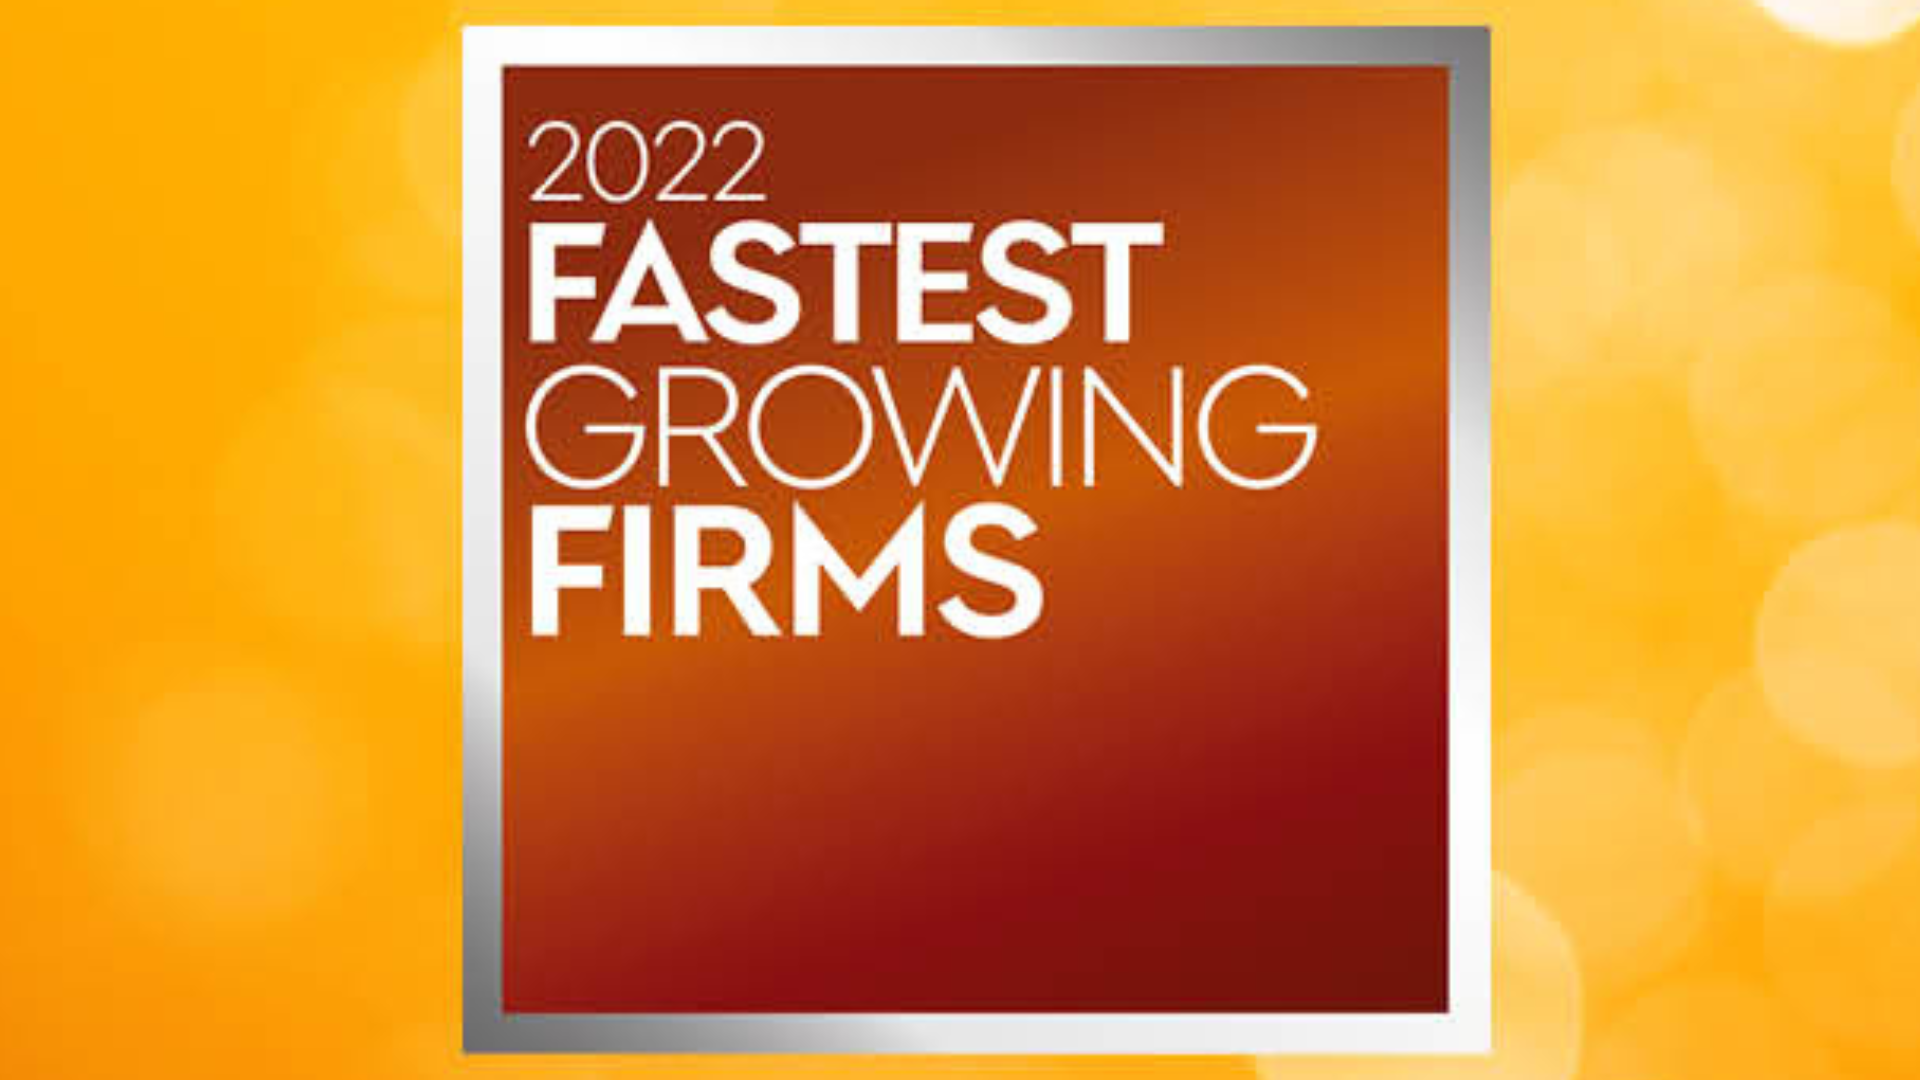 Consulting Magazine Ranks Fastest Growing Firms for 2022